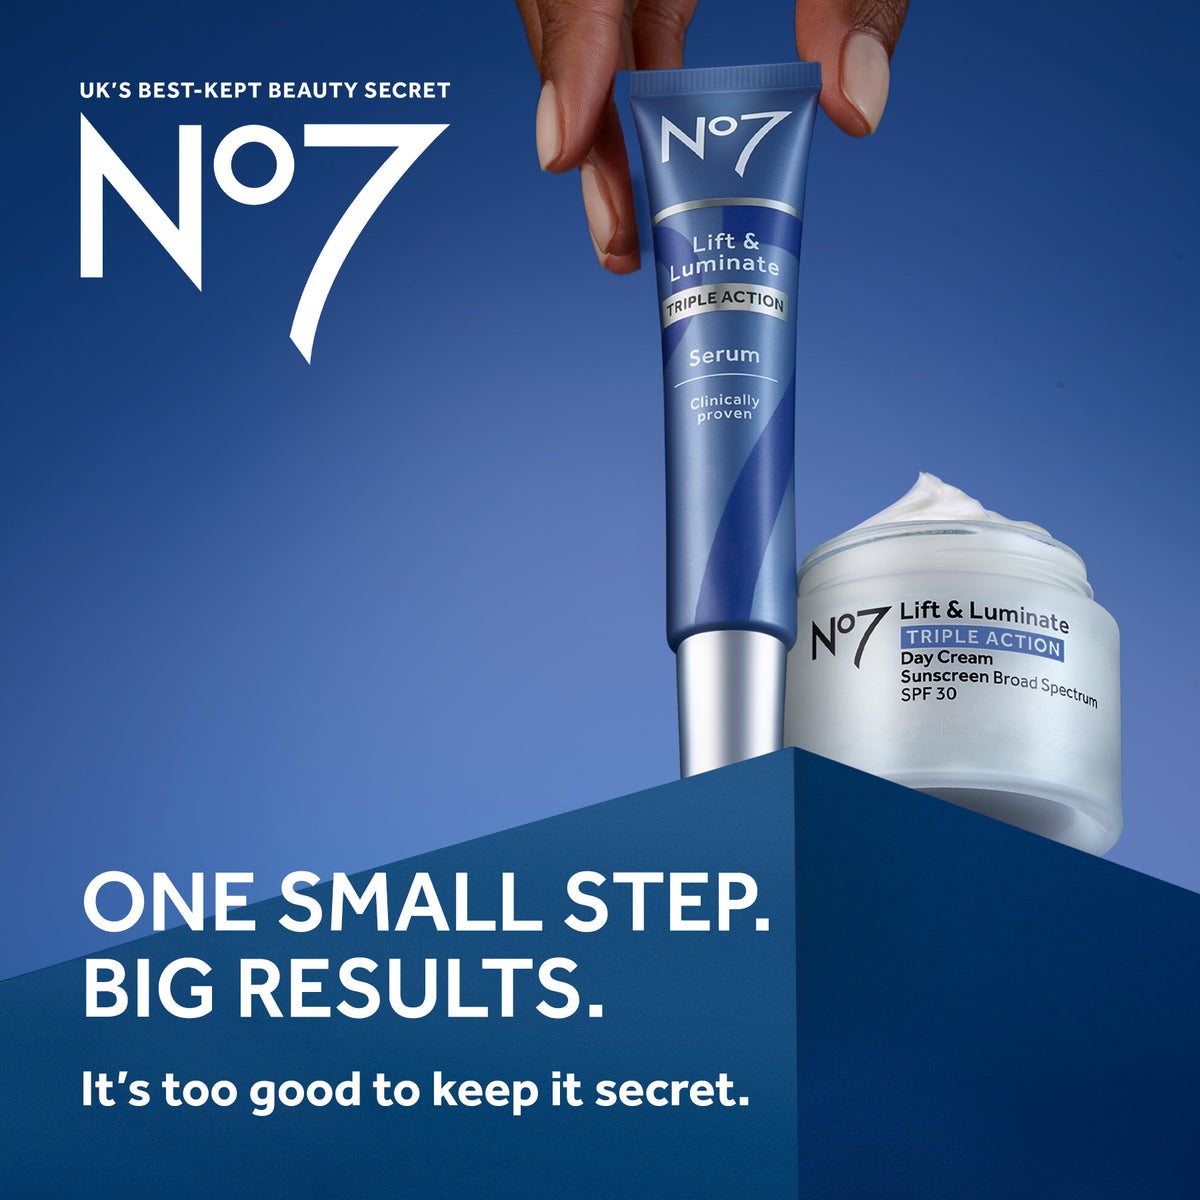 ONE SMALL STEP. BIG RESULTS. Add No7 Lift & Luminate Serum for clinically proven more even looking skin tone. It's too good to keep it secret.